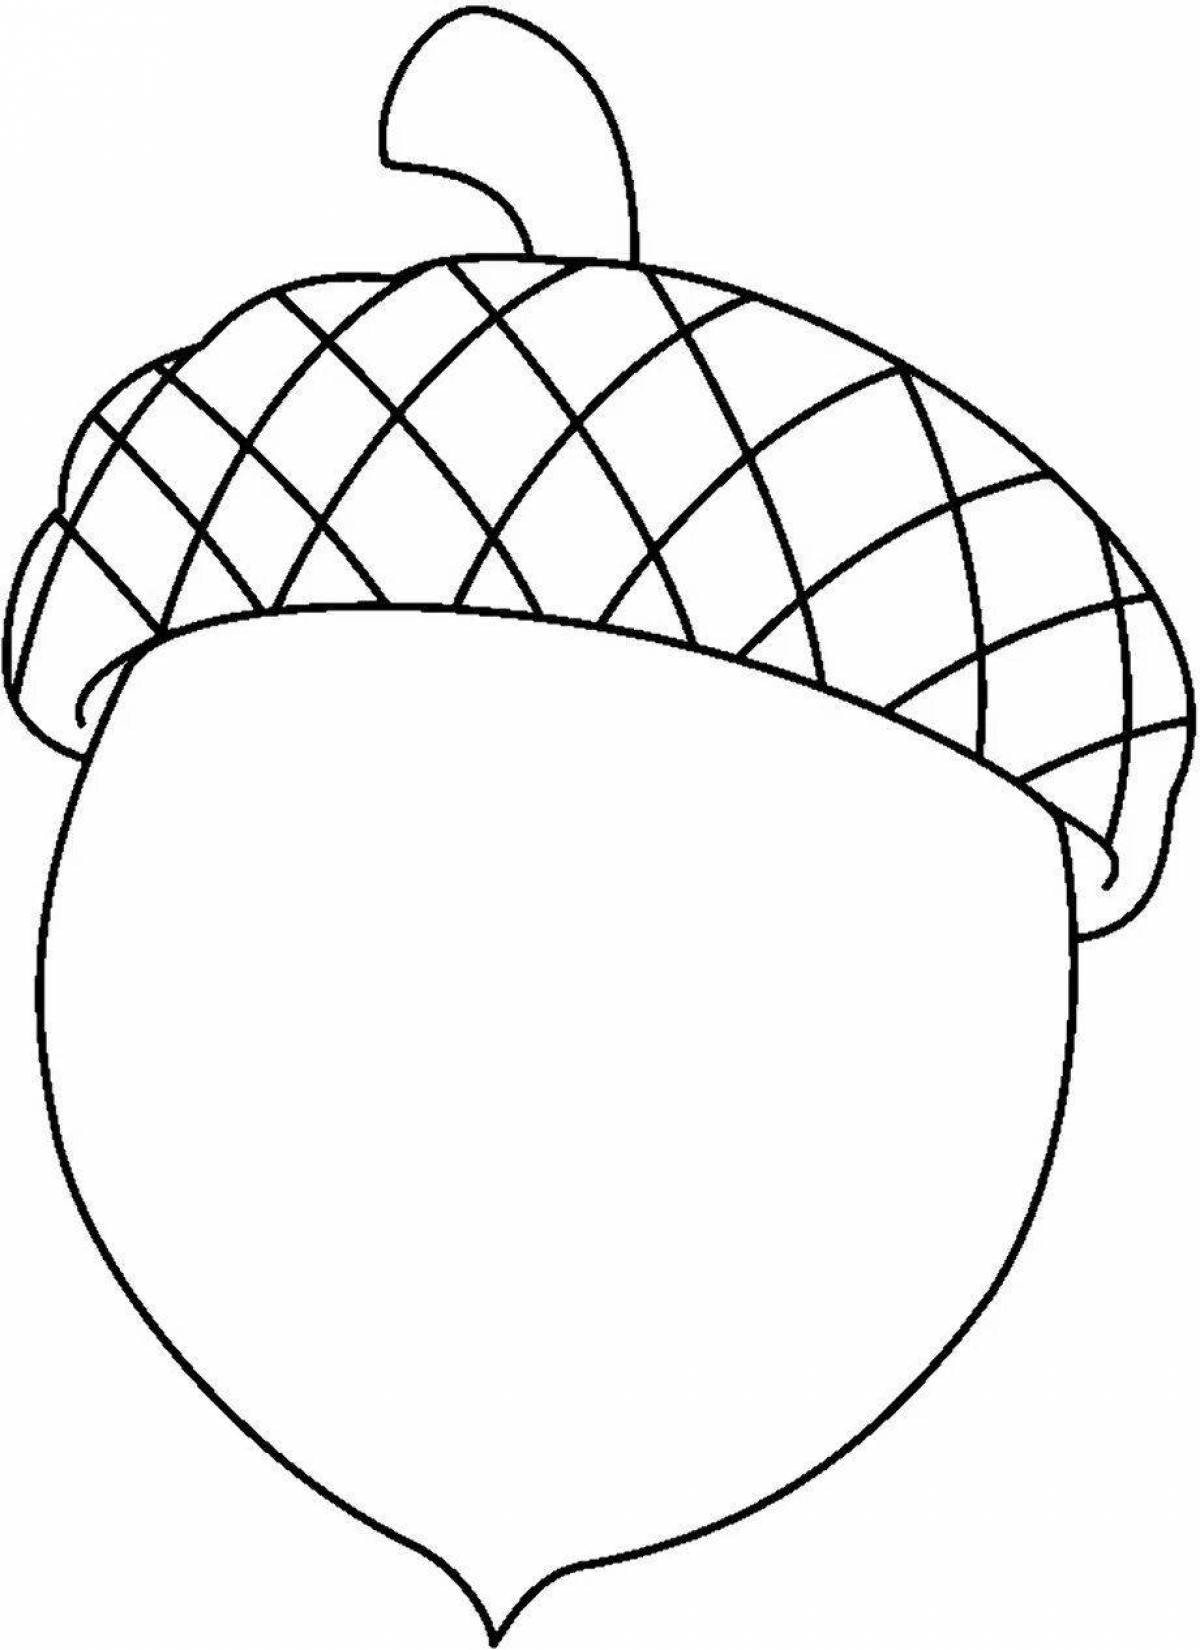 Outstanding acorn coloring page for kids